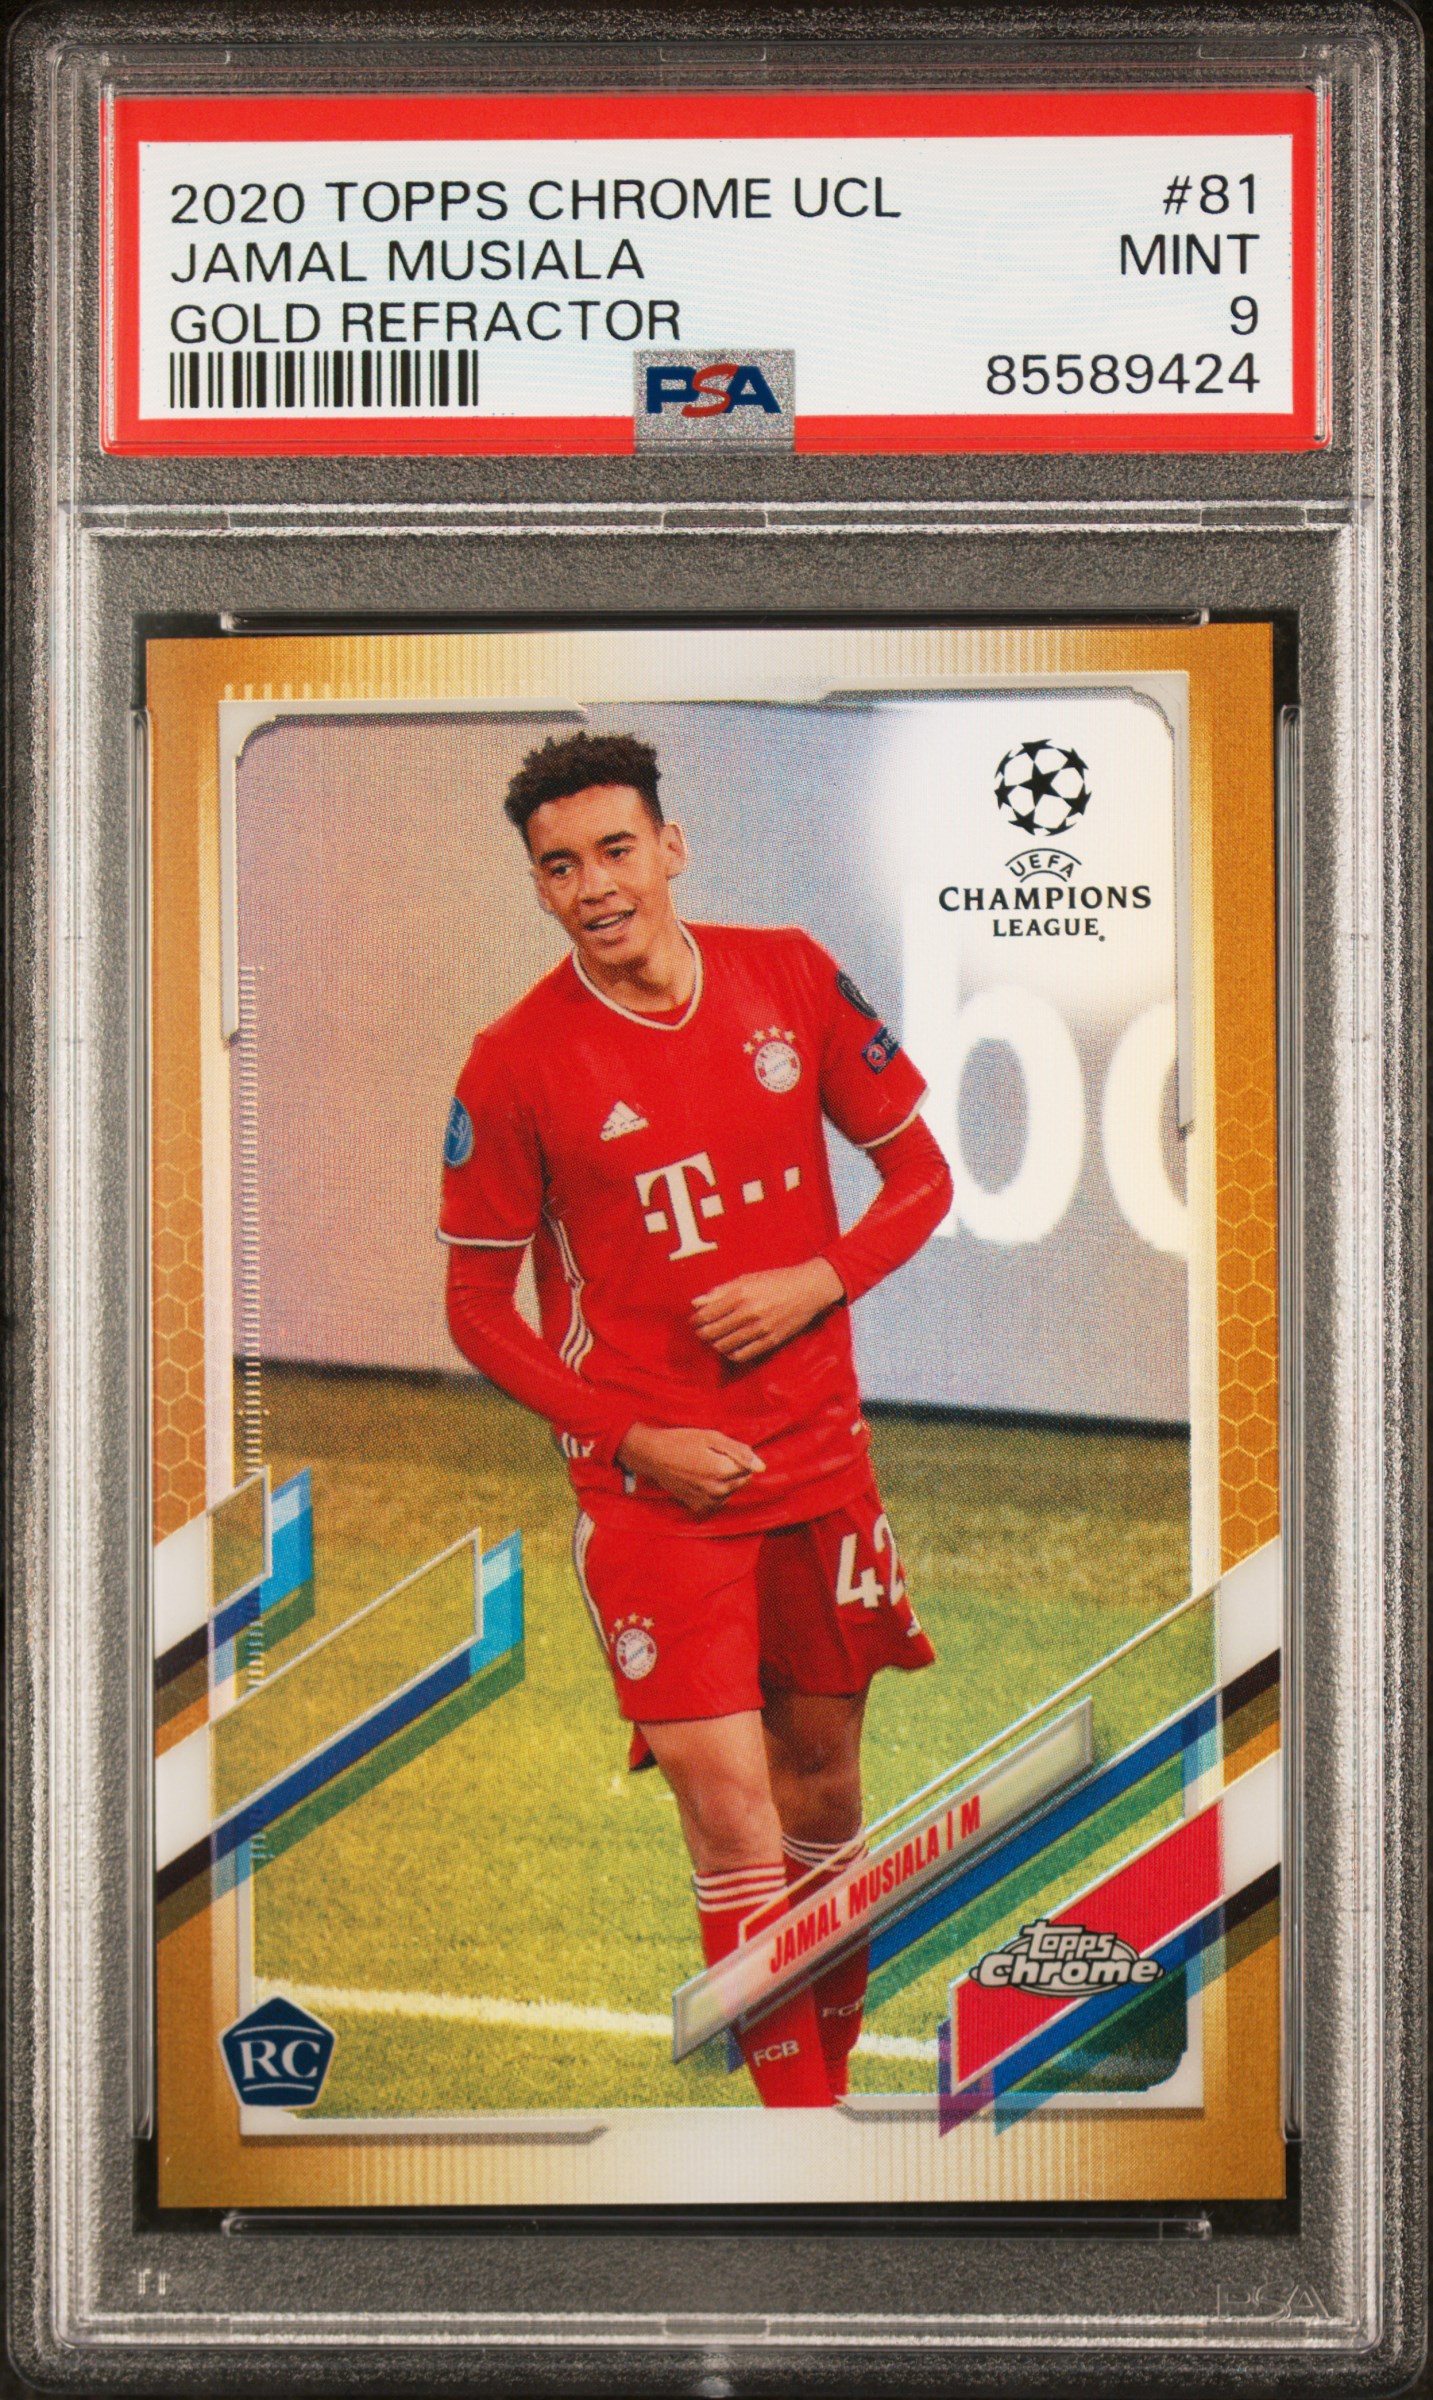 2020-21 Topps Chrome UEFA Champions League Gold Refractor #81 Jamal Musiala Rookie Card (#36/50)– PSA MINT 9